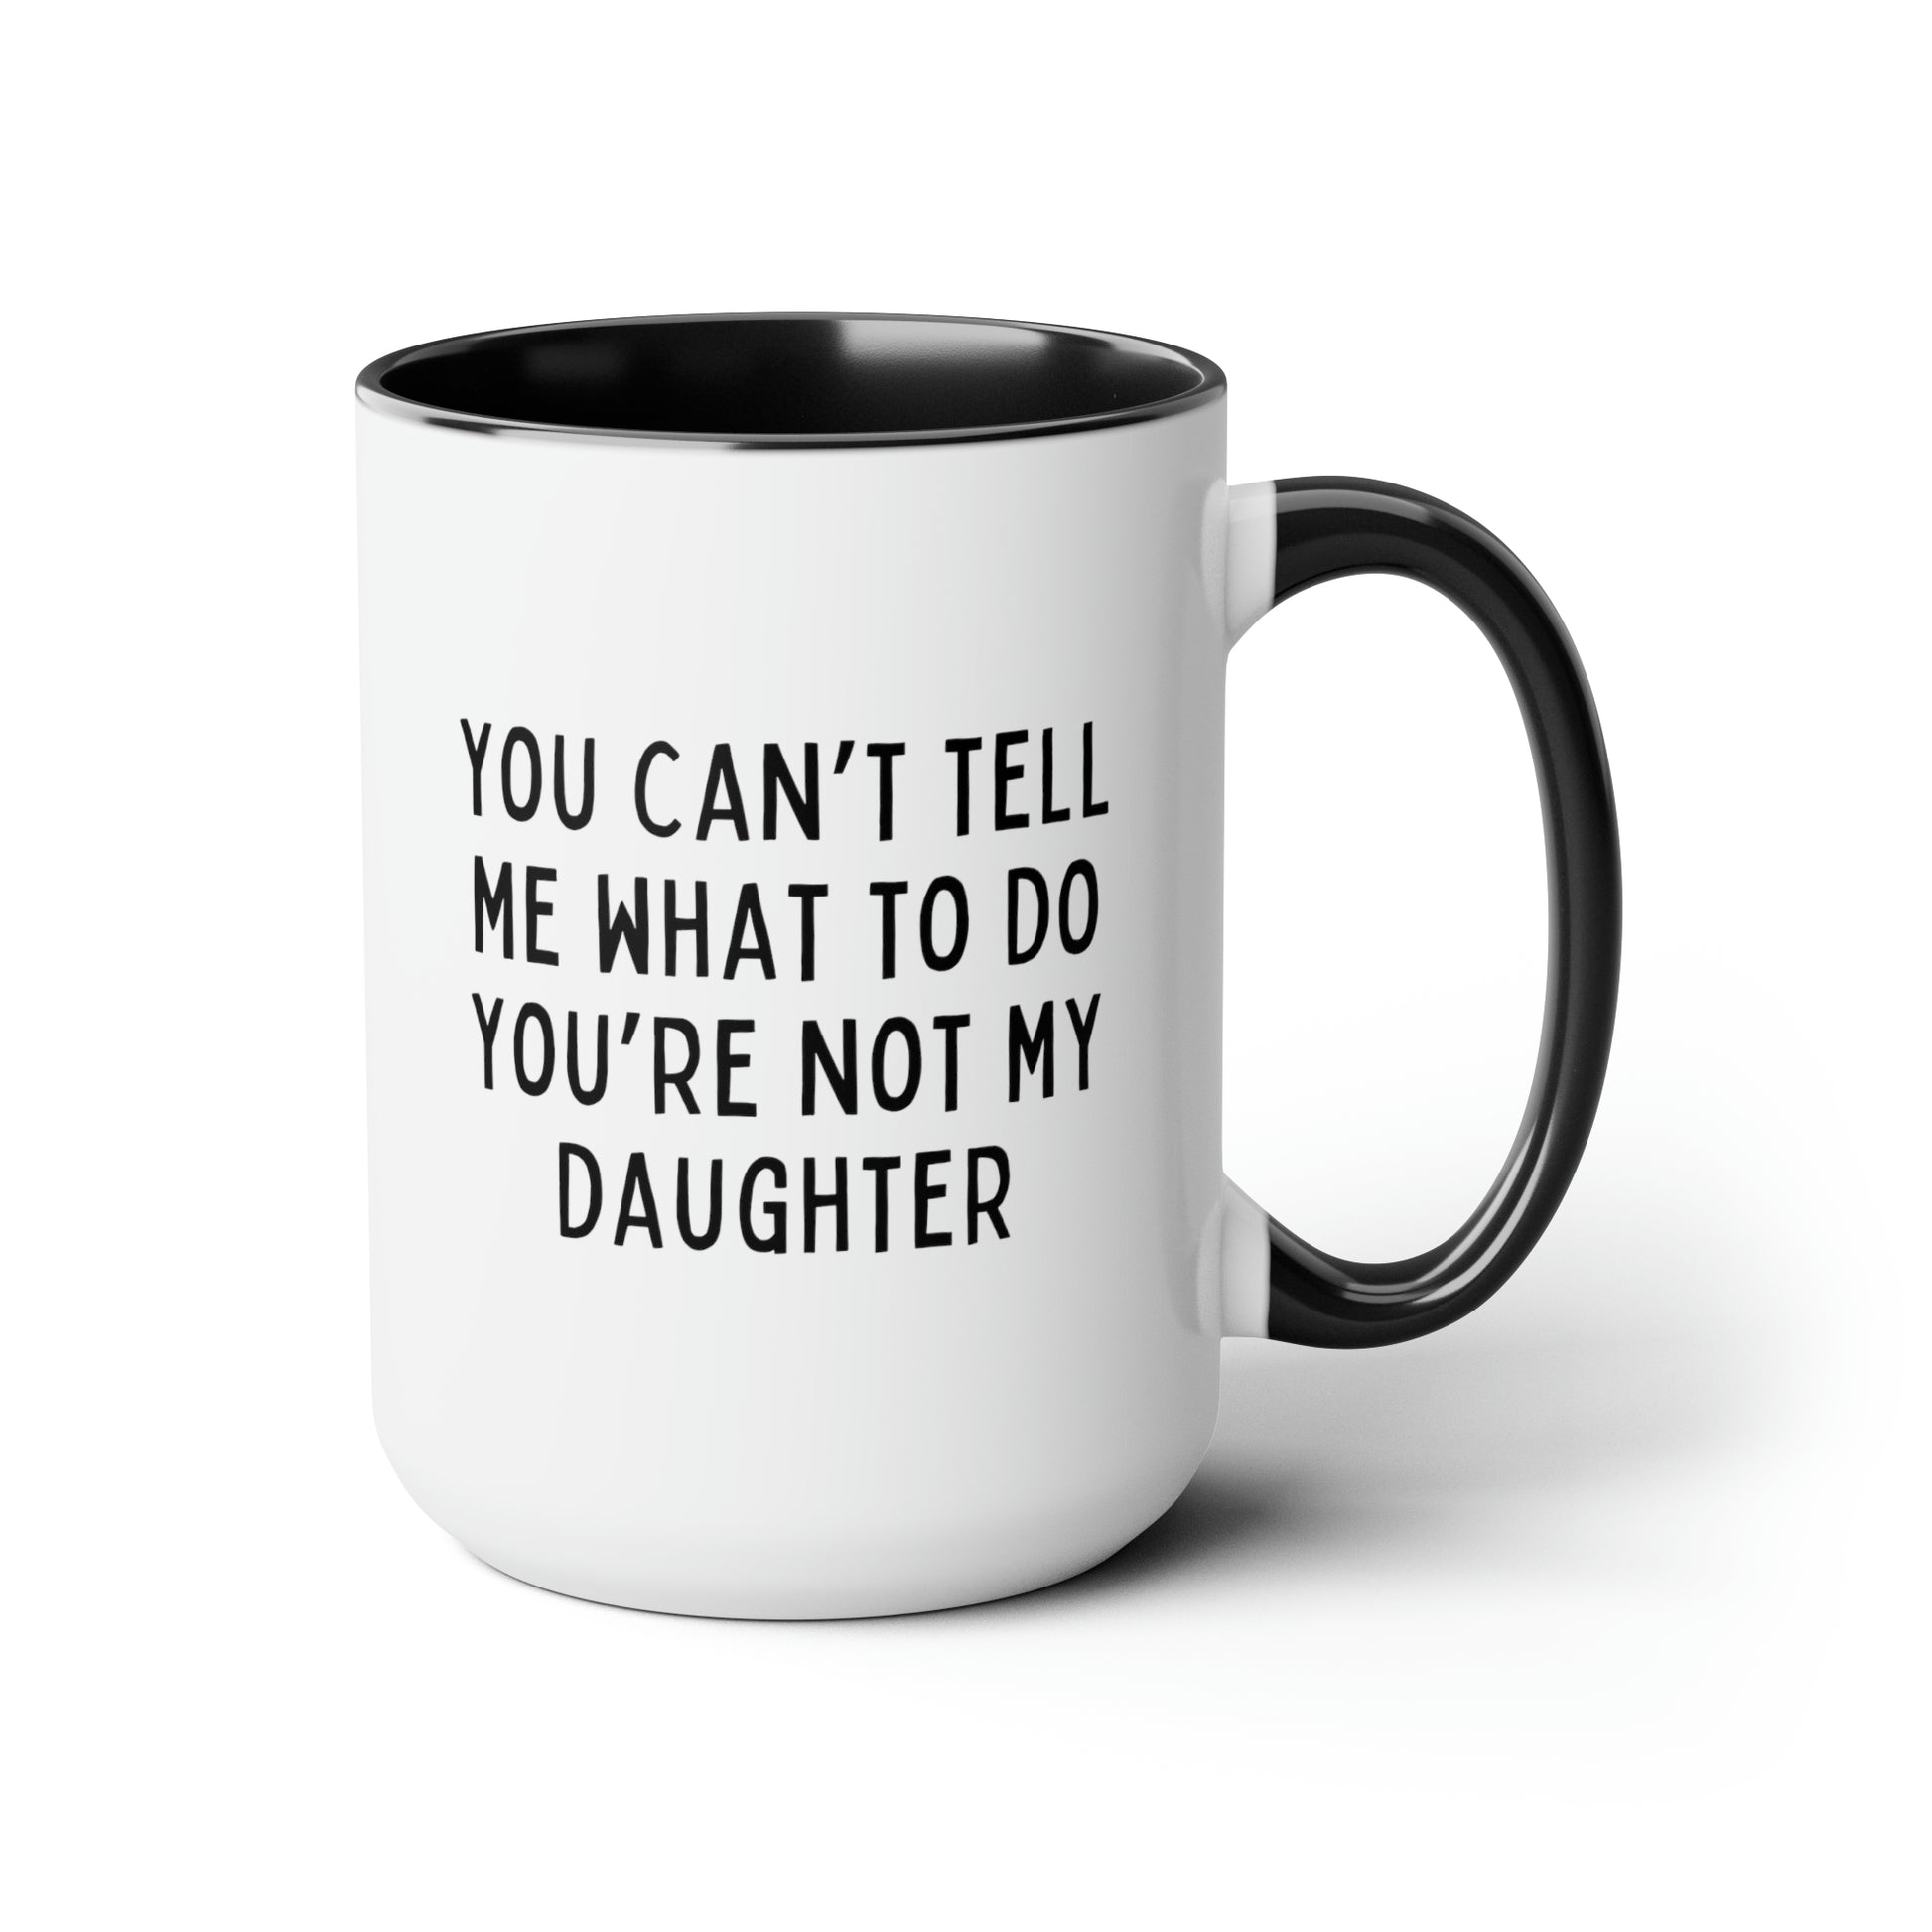 You Can't Tell Me What To Do You're Not My Daughter 15oz white with black accent funny large coffee mug gift for dad fathers day grandfather grandpa waveywares wavey wares wavywares wavy wares